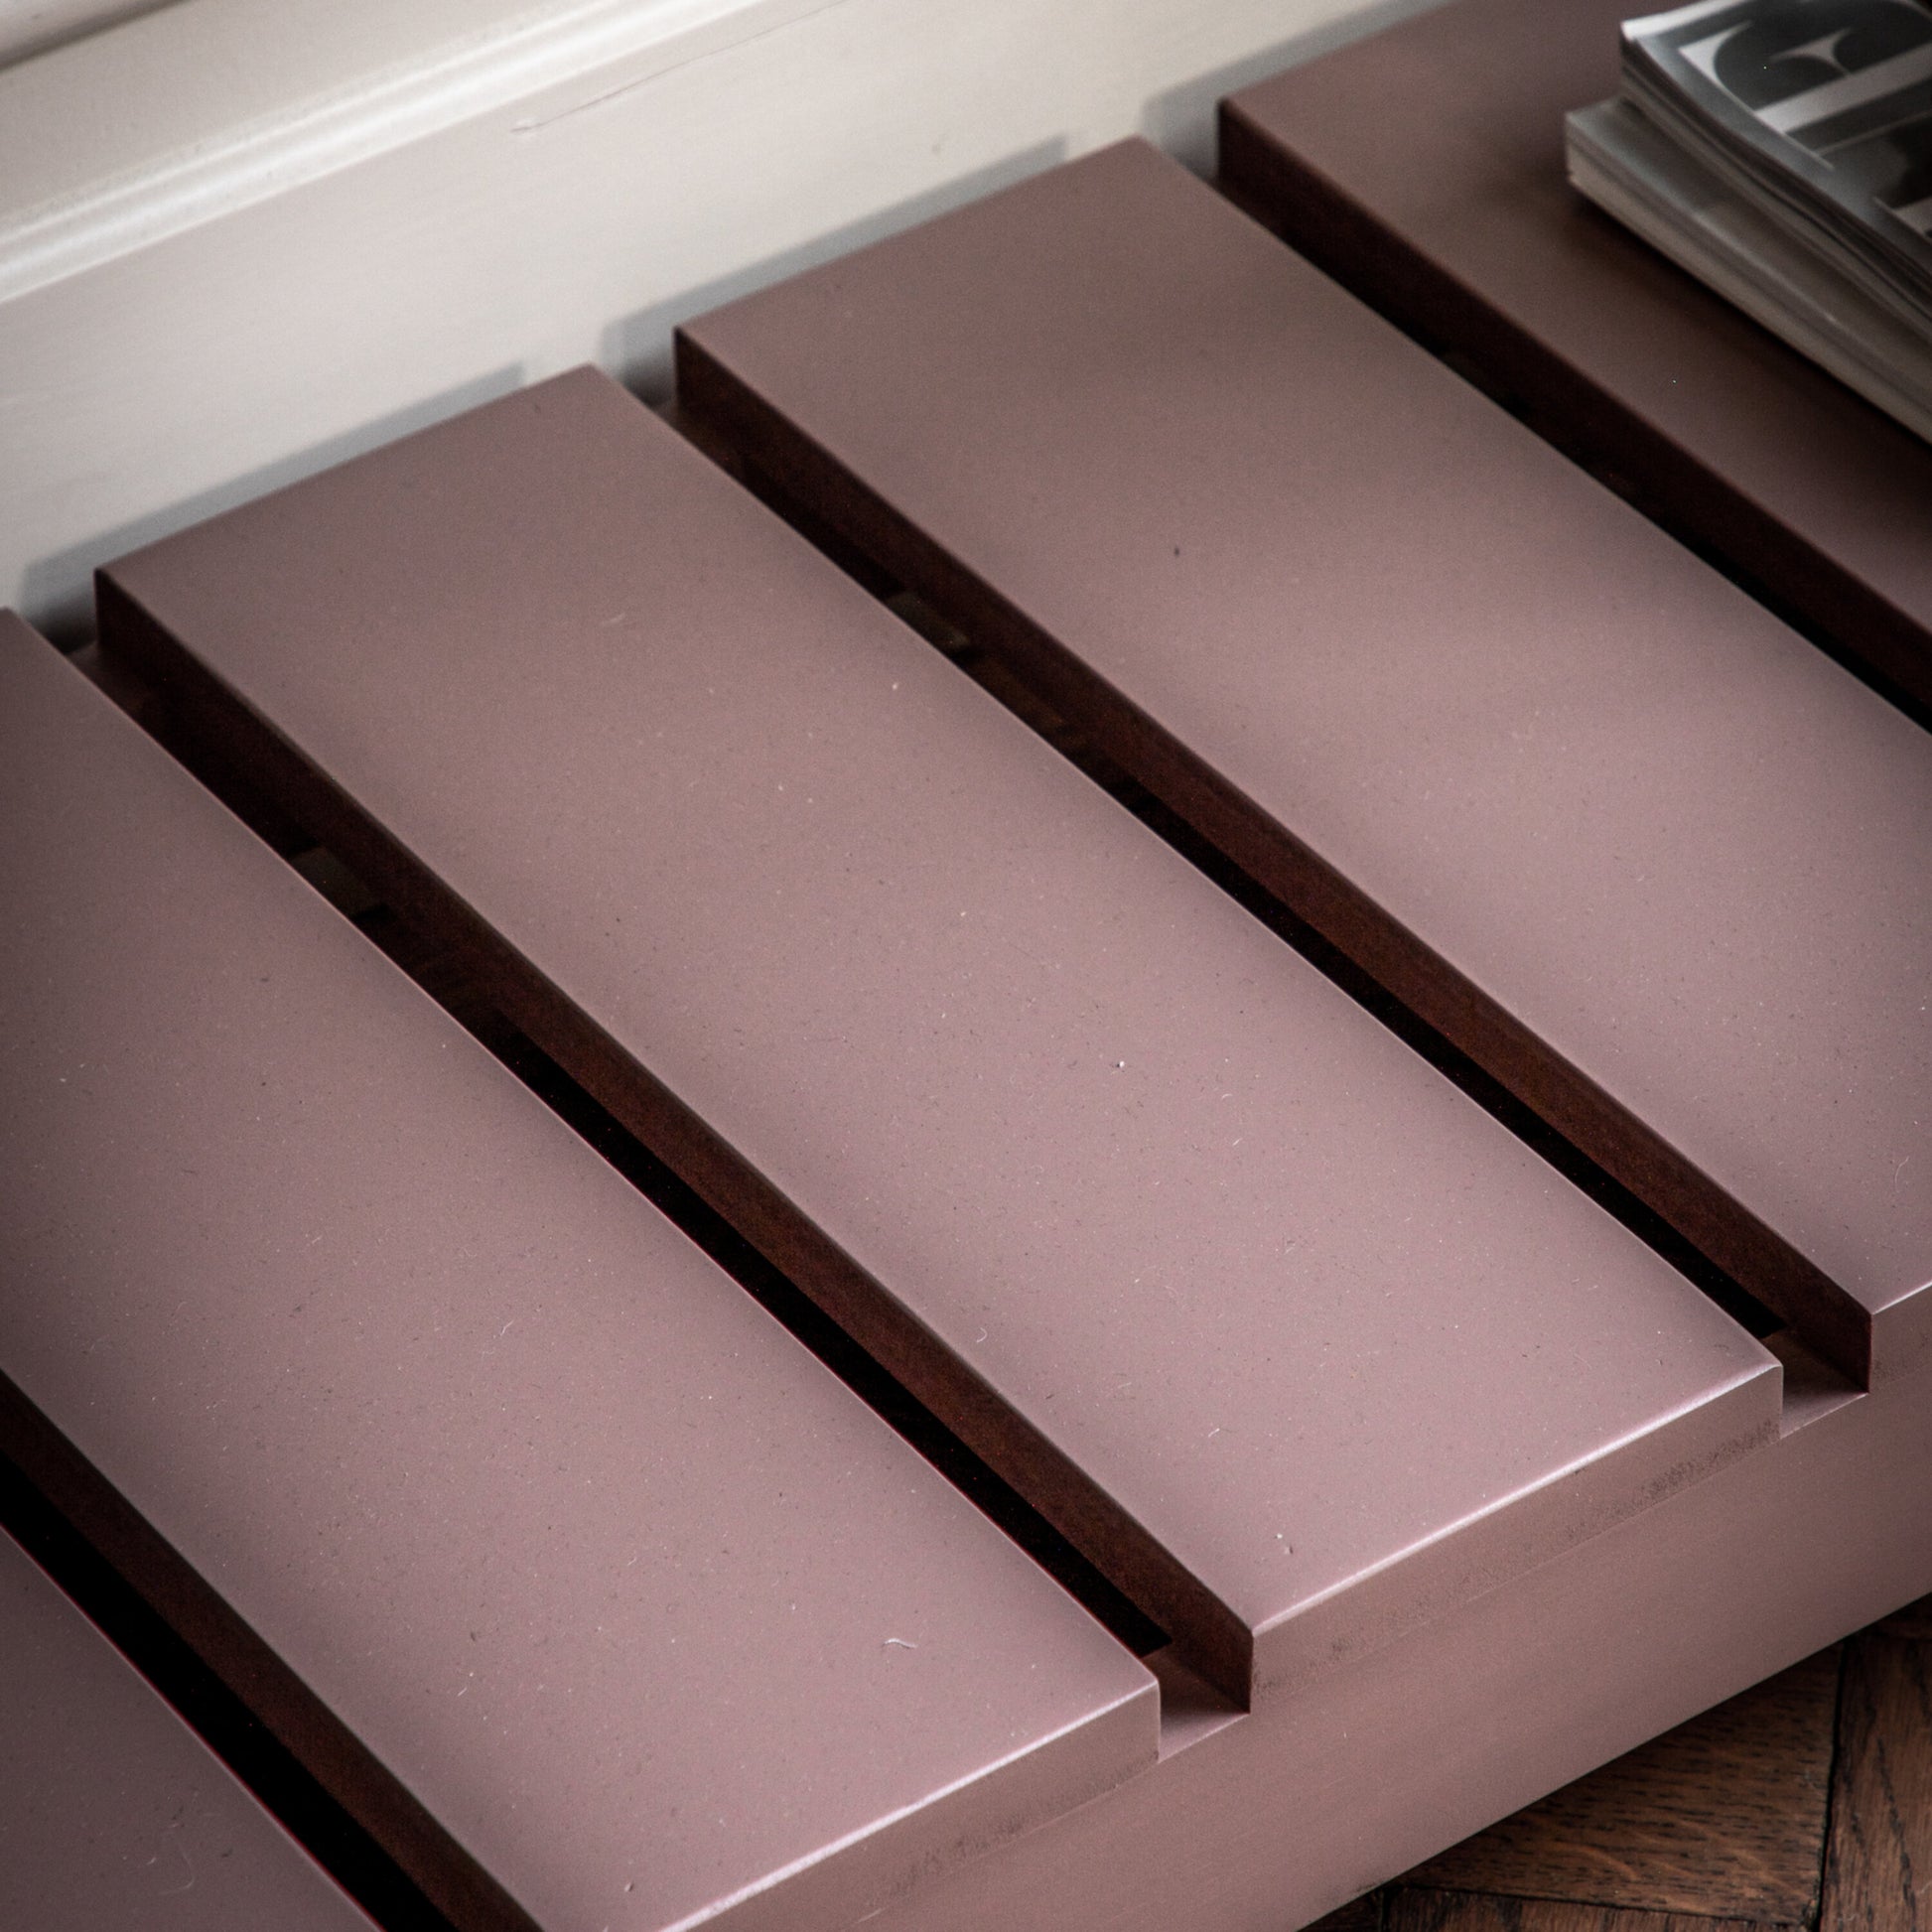 Asher 2 Drawer Console | Clay 